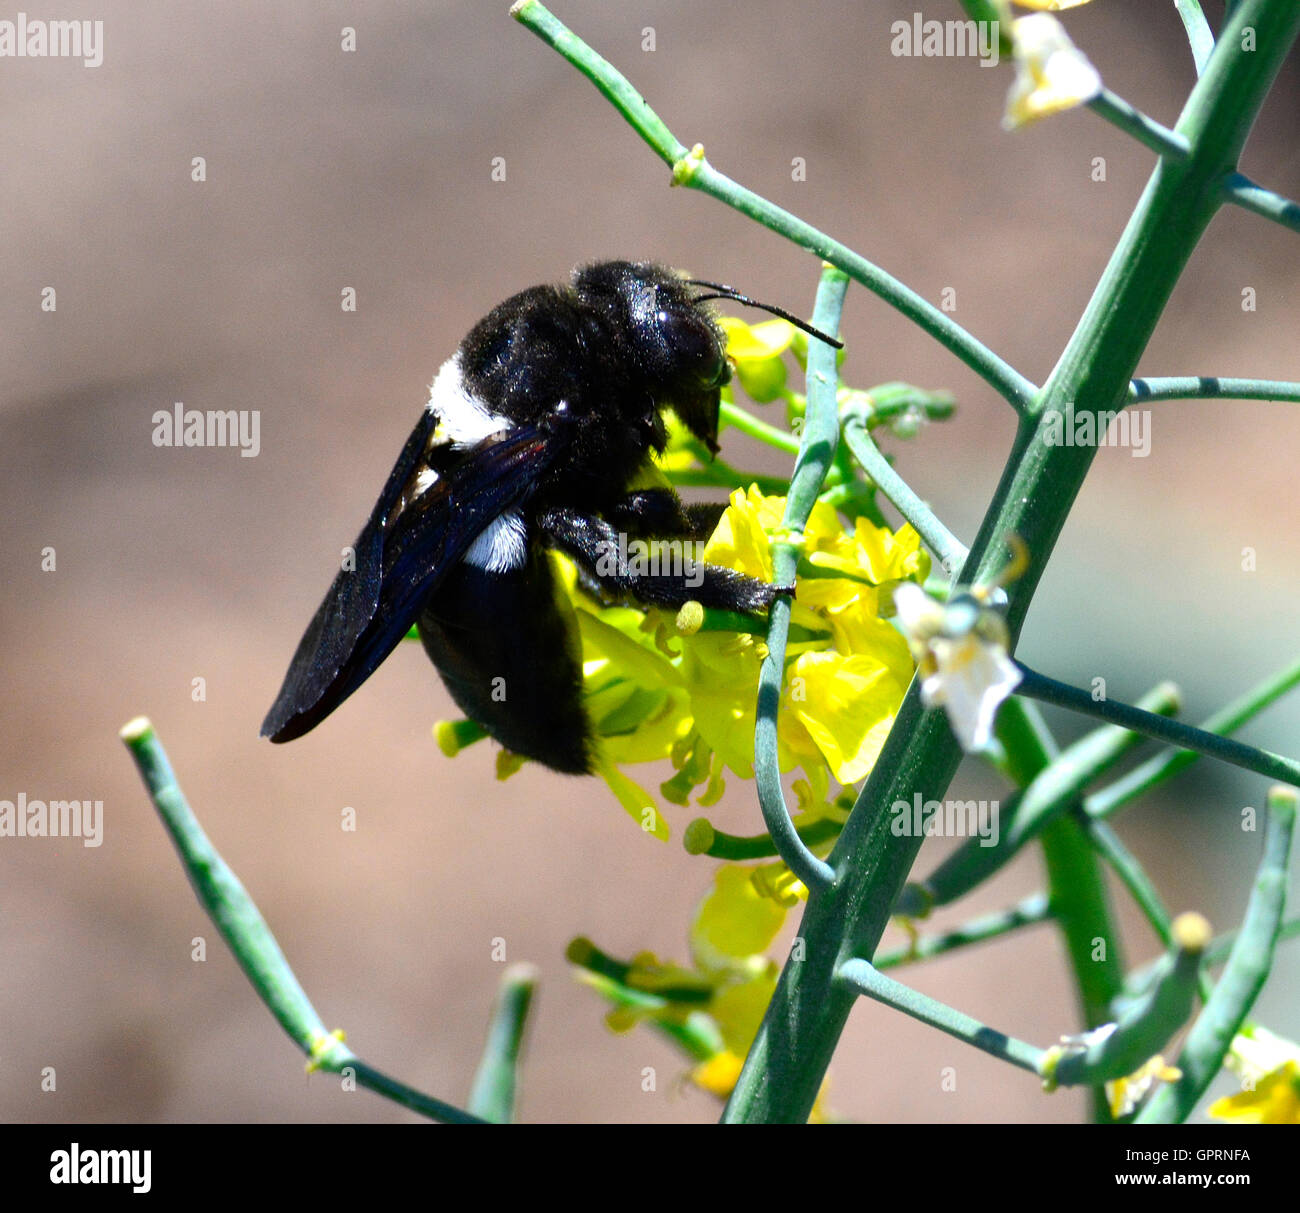 Black and white Carpenter bee (Xylocopa) has big black eyes like pictures of an alien. Active pollinators important ecologically Stock Photo